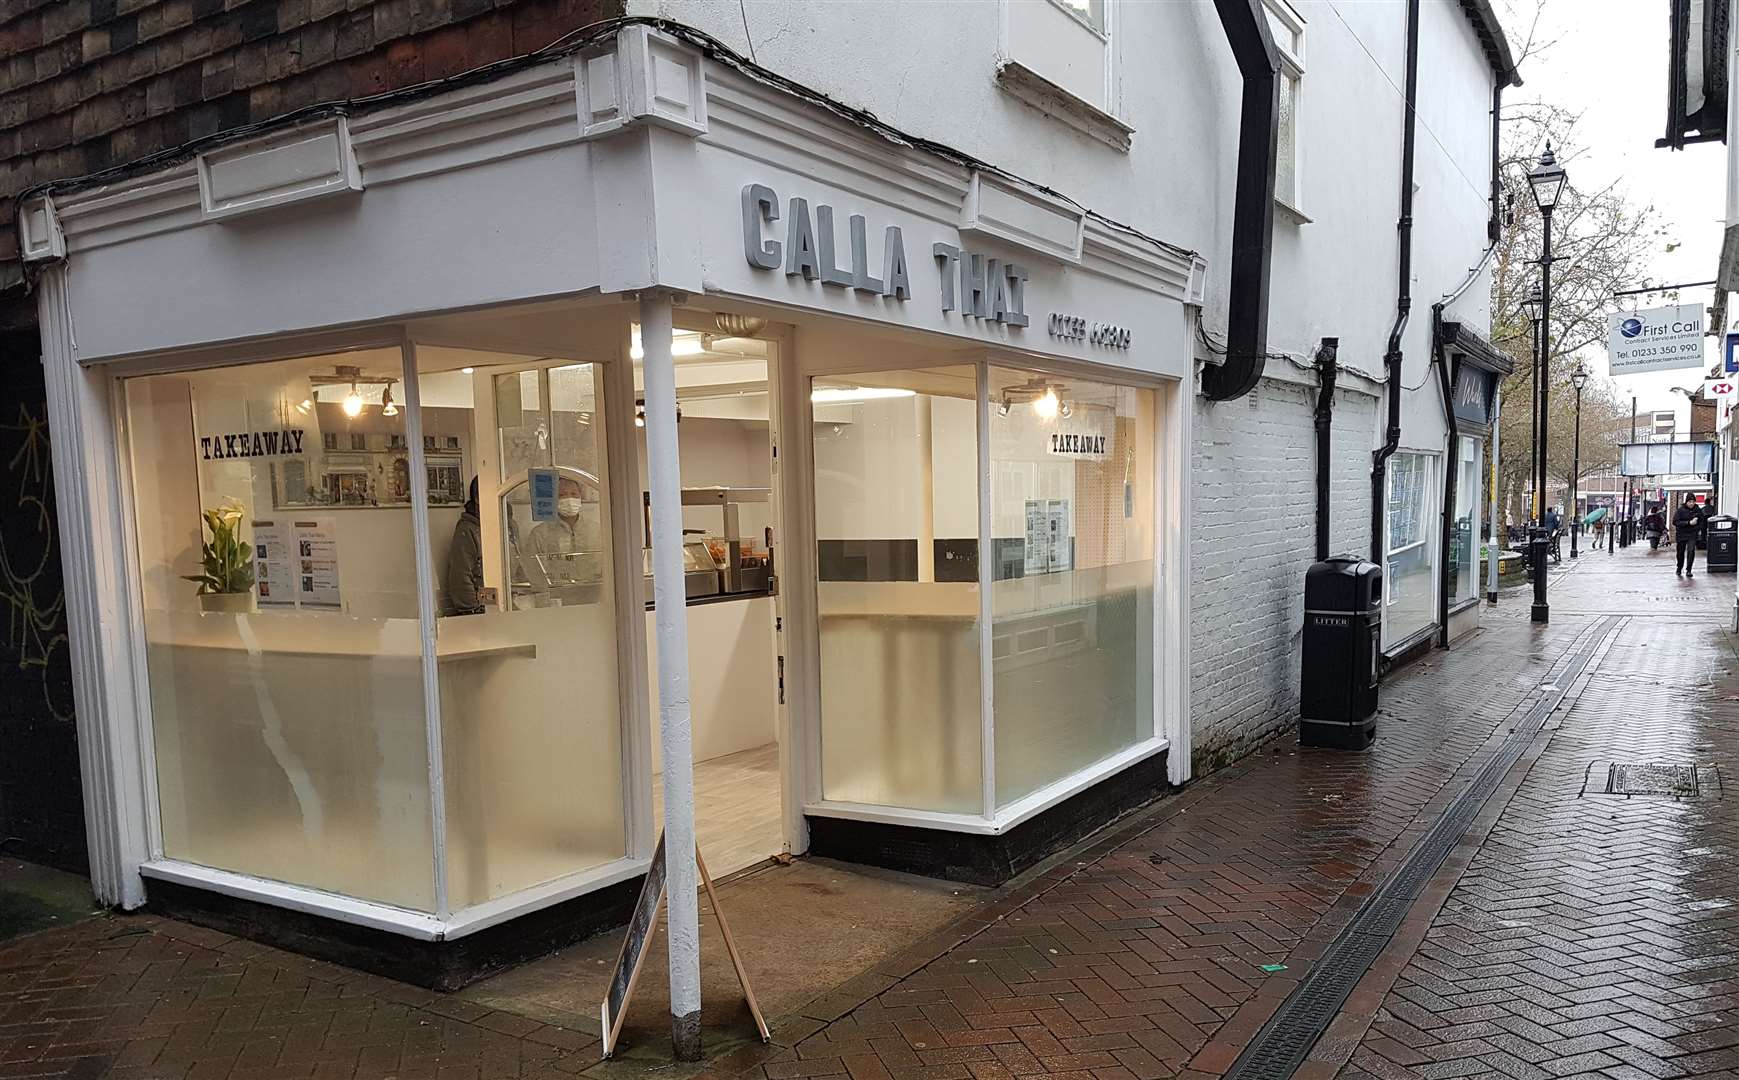 Calla Thai, a new takeaway restaurant in Middle Row, opened at the end of November